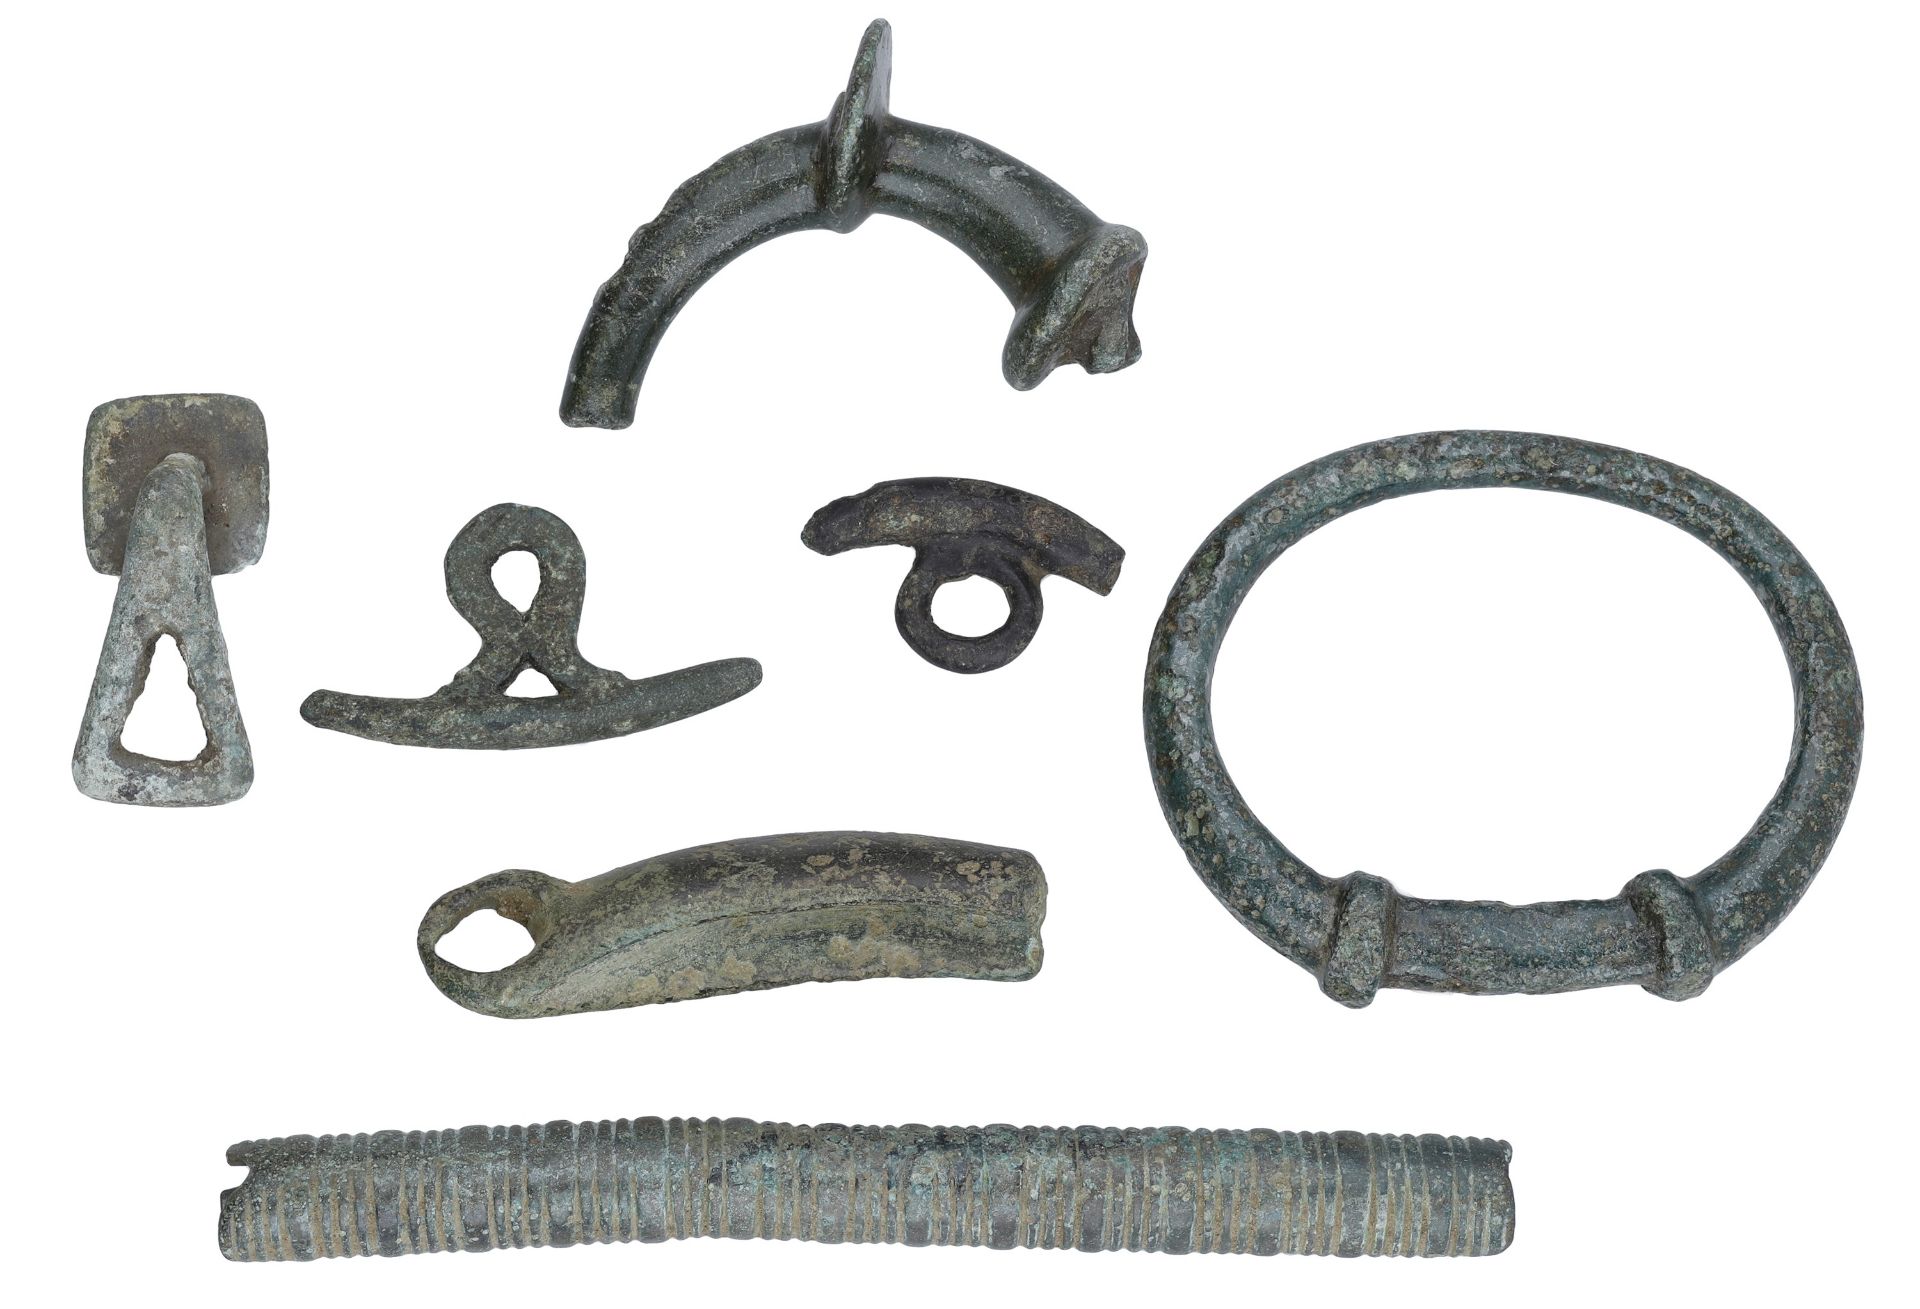 Celtic, miscellaneous bronze artefacts (7), 2nd century BC to 1st century AD, including squa...